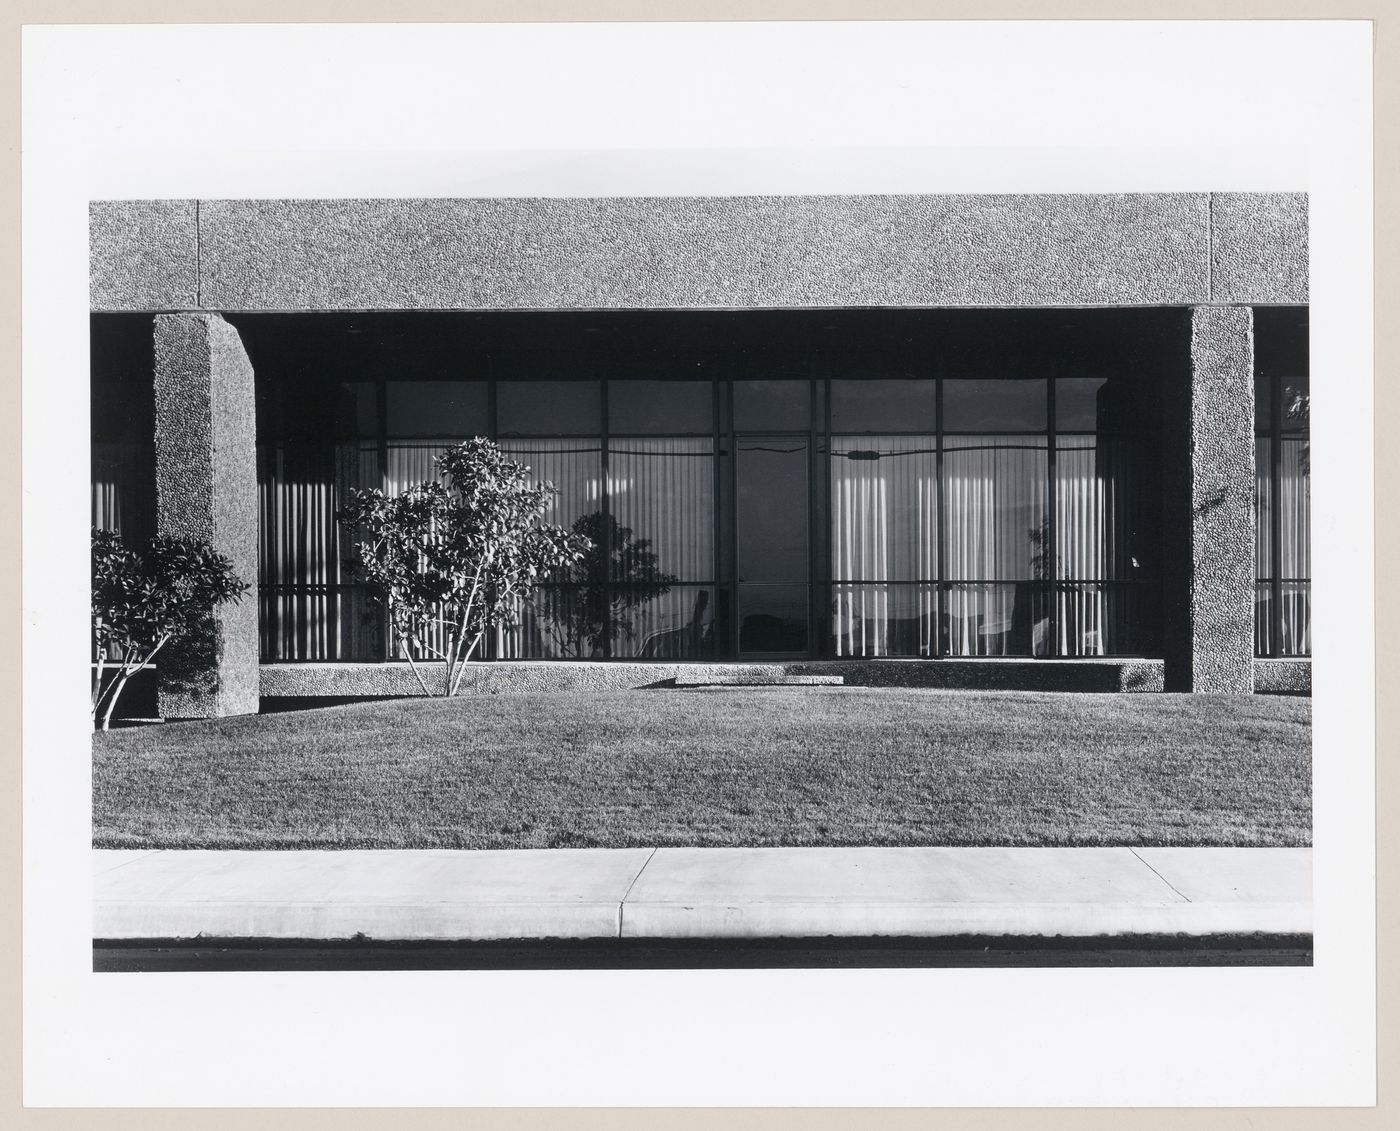 View of the north wall of General Offices, RB Furniture, 2323 South East Main Street, Santa Ana, California, United States, from the series “The new Industrial Parks near Irvine, California”